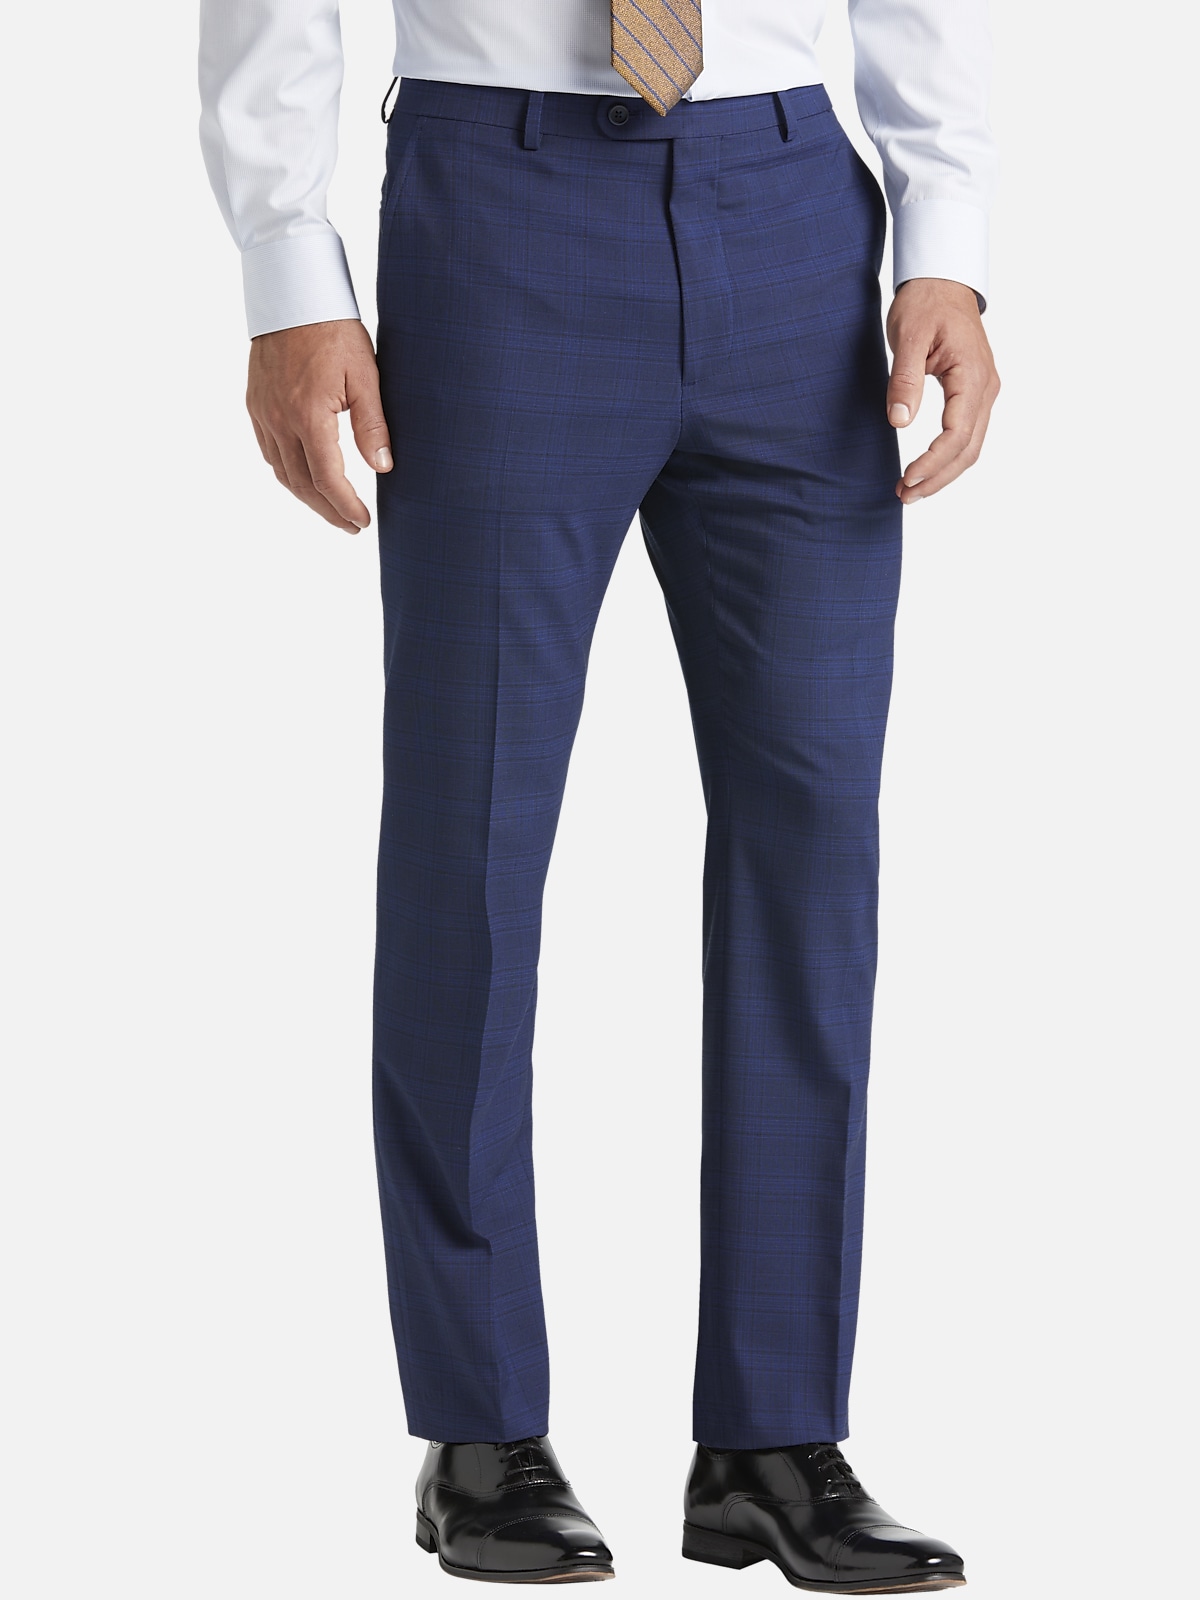 Pronto Uomo Modern Fit Plaid Suit Separates Pants | All Clearance $39. ...